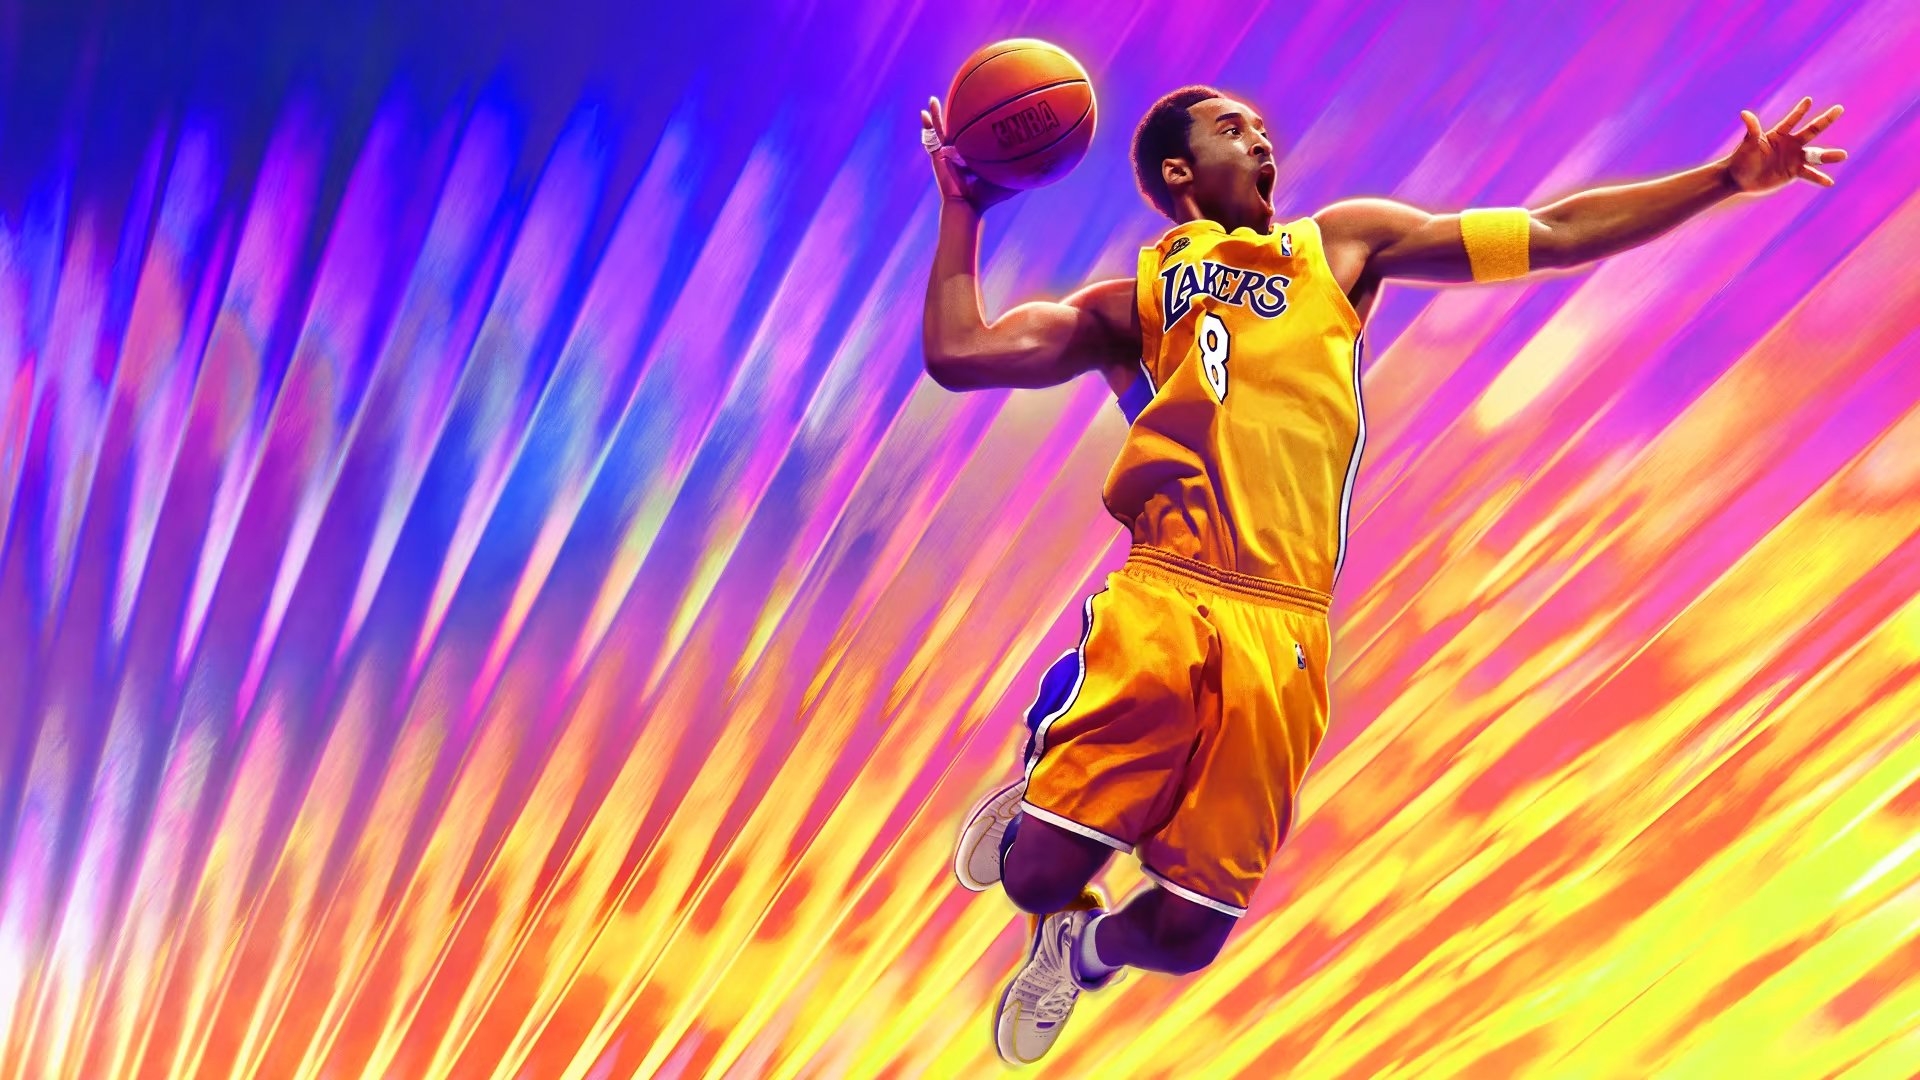 NBA 2K24 Is Now One of the Lowest-Rated Steam Games of All Time